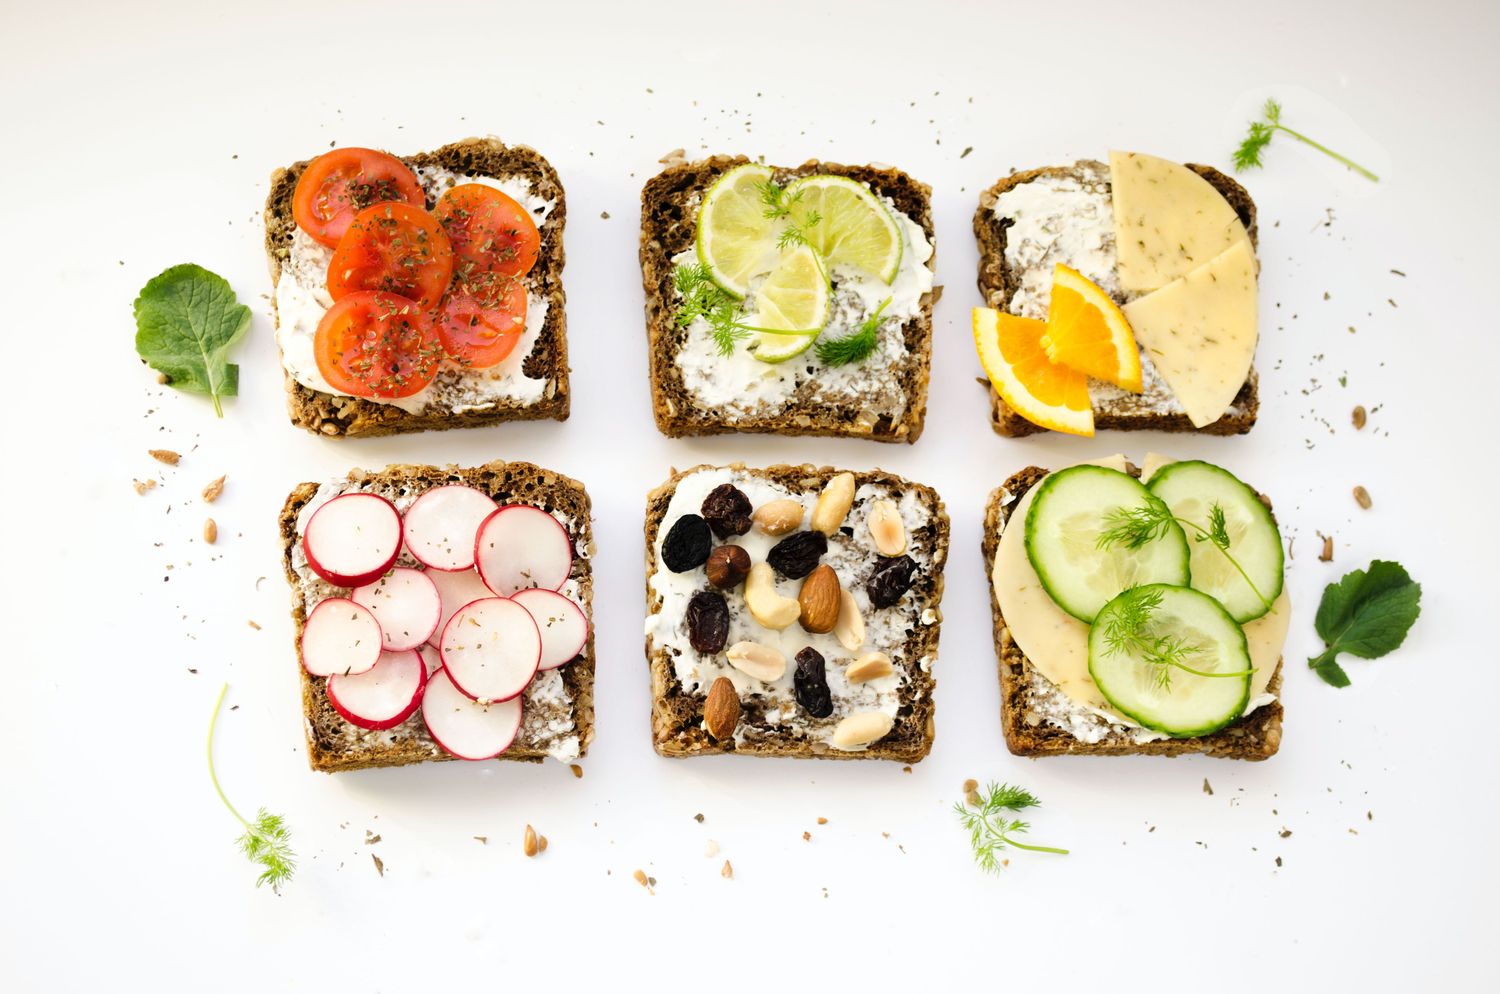 Gallery Photo of Open Faced Sandwiches